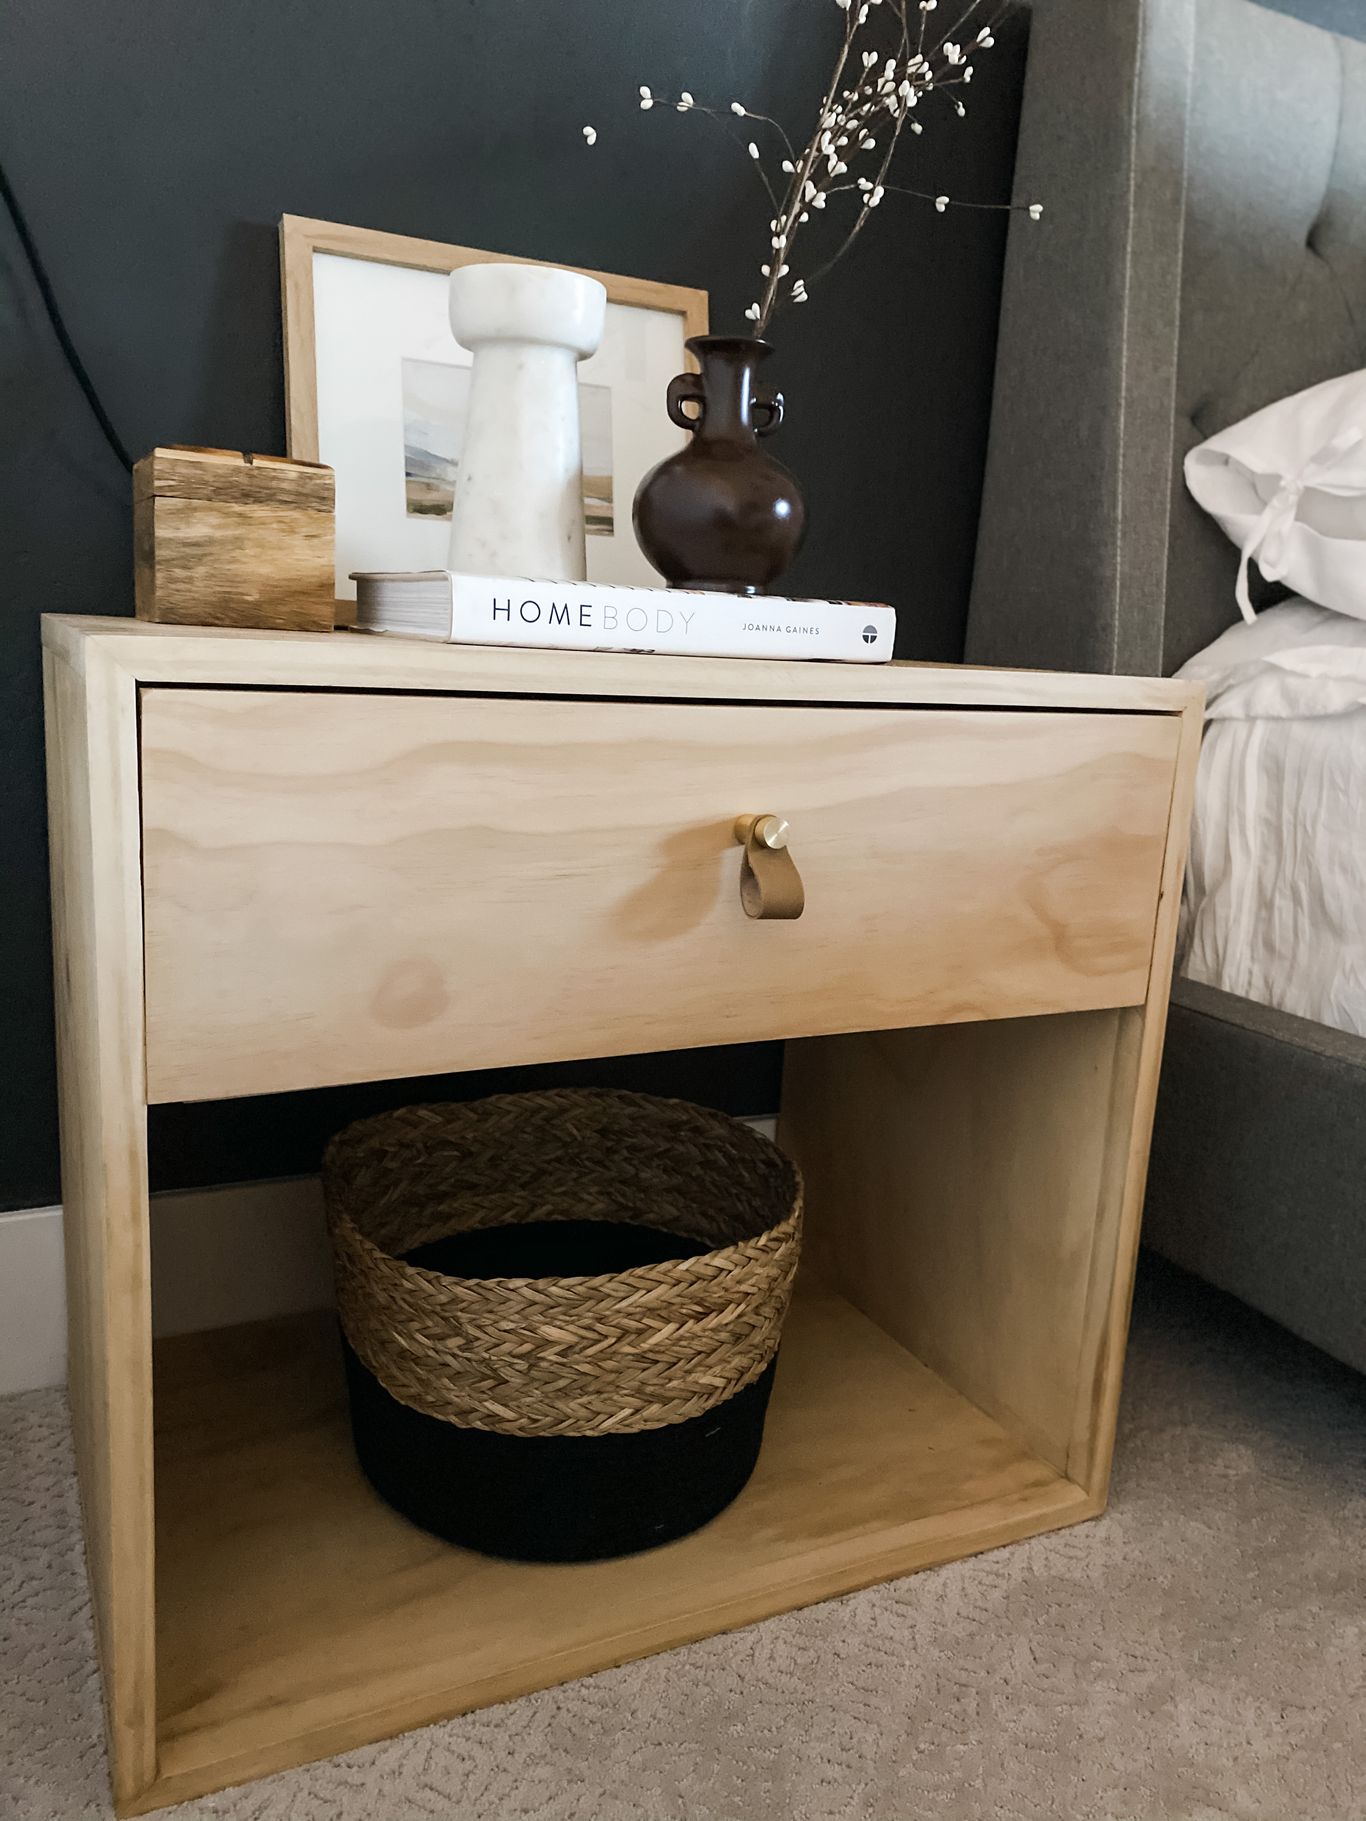 A DIY nightstand How to build a stylish and minimalist DIY nightstand